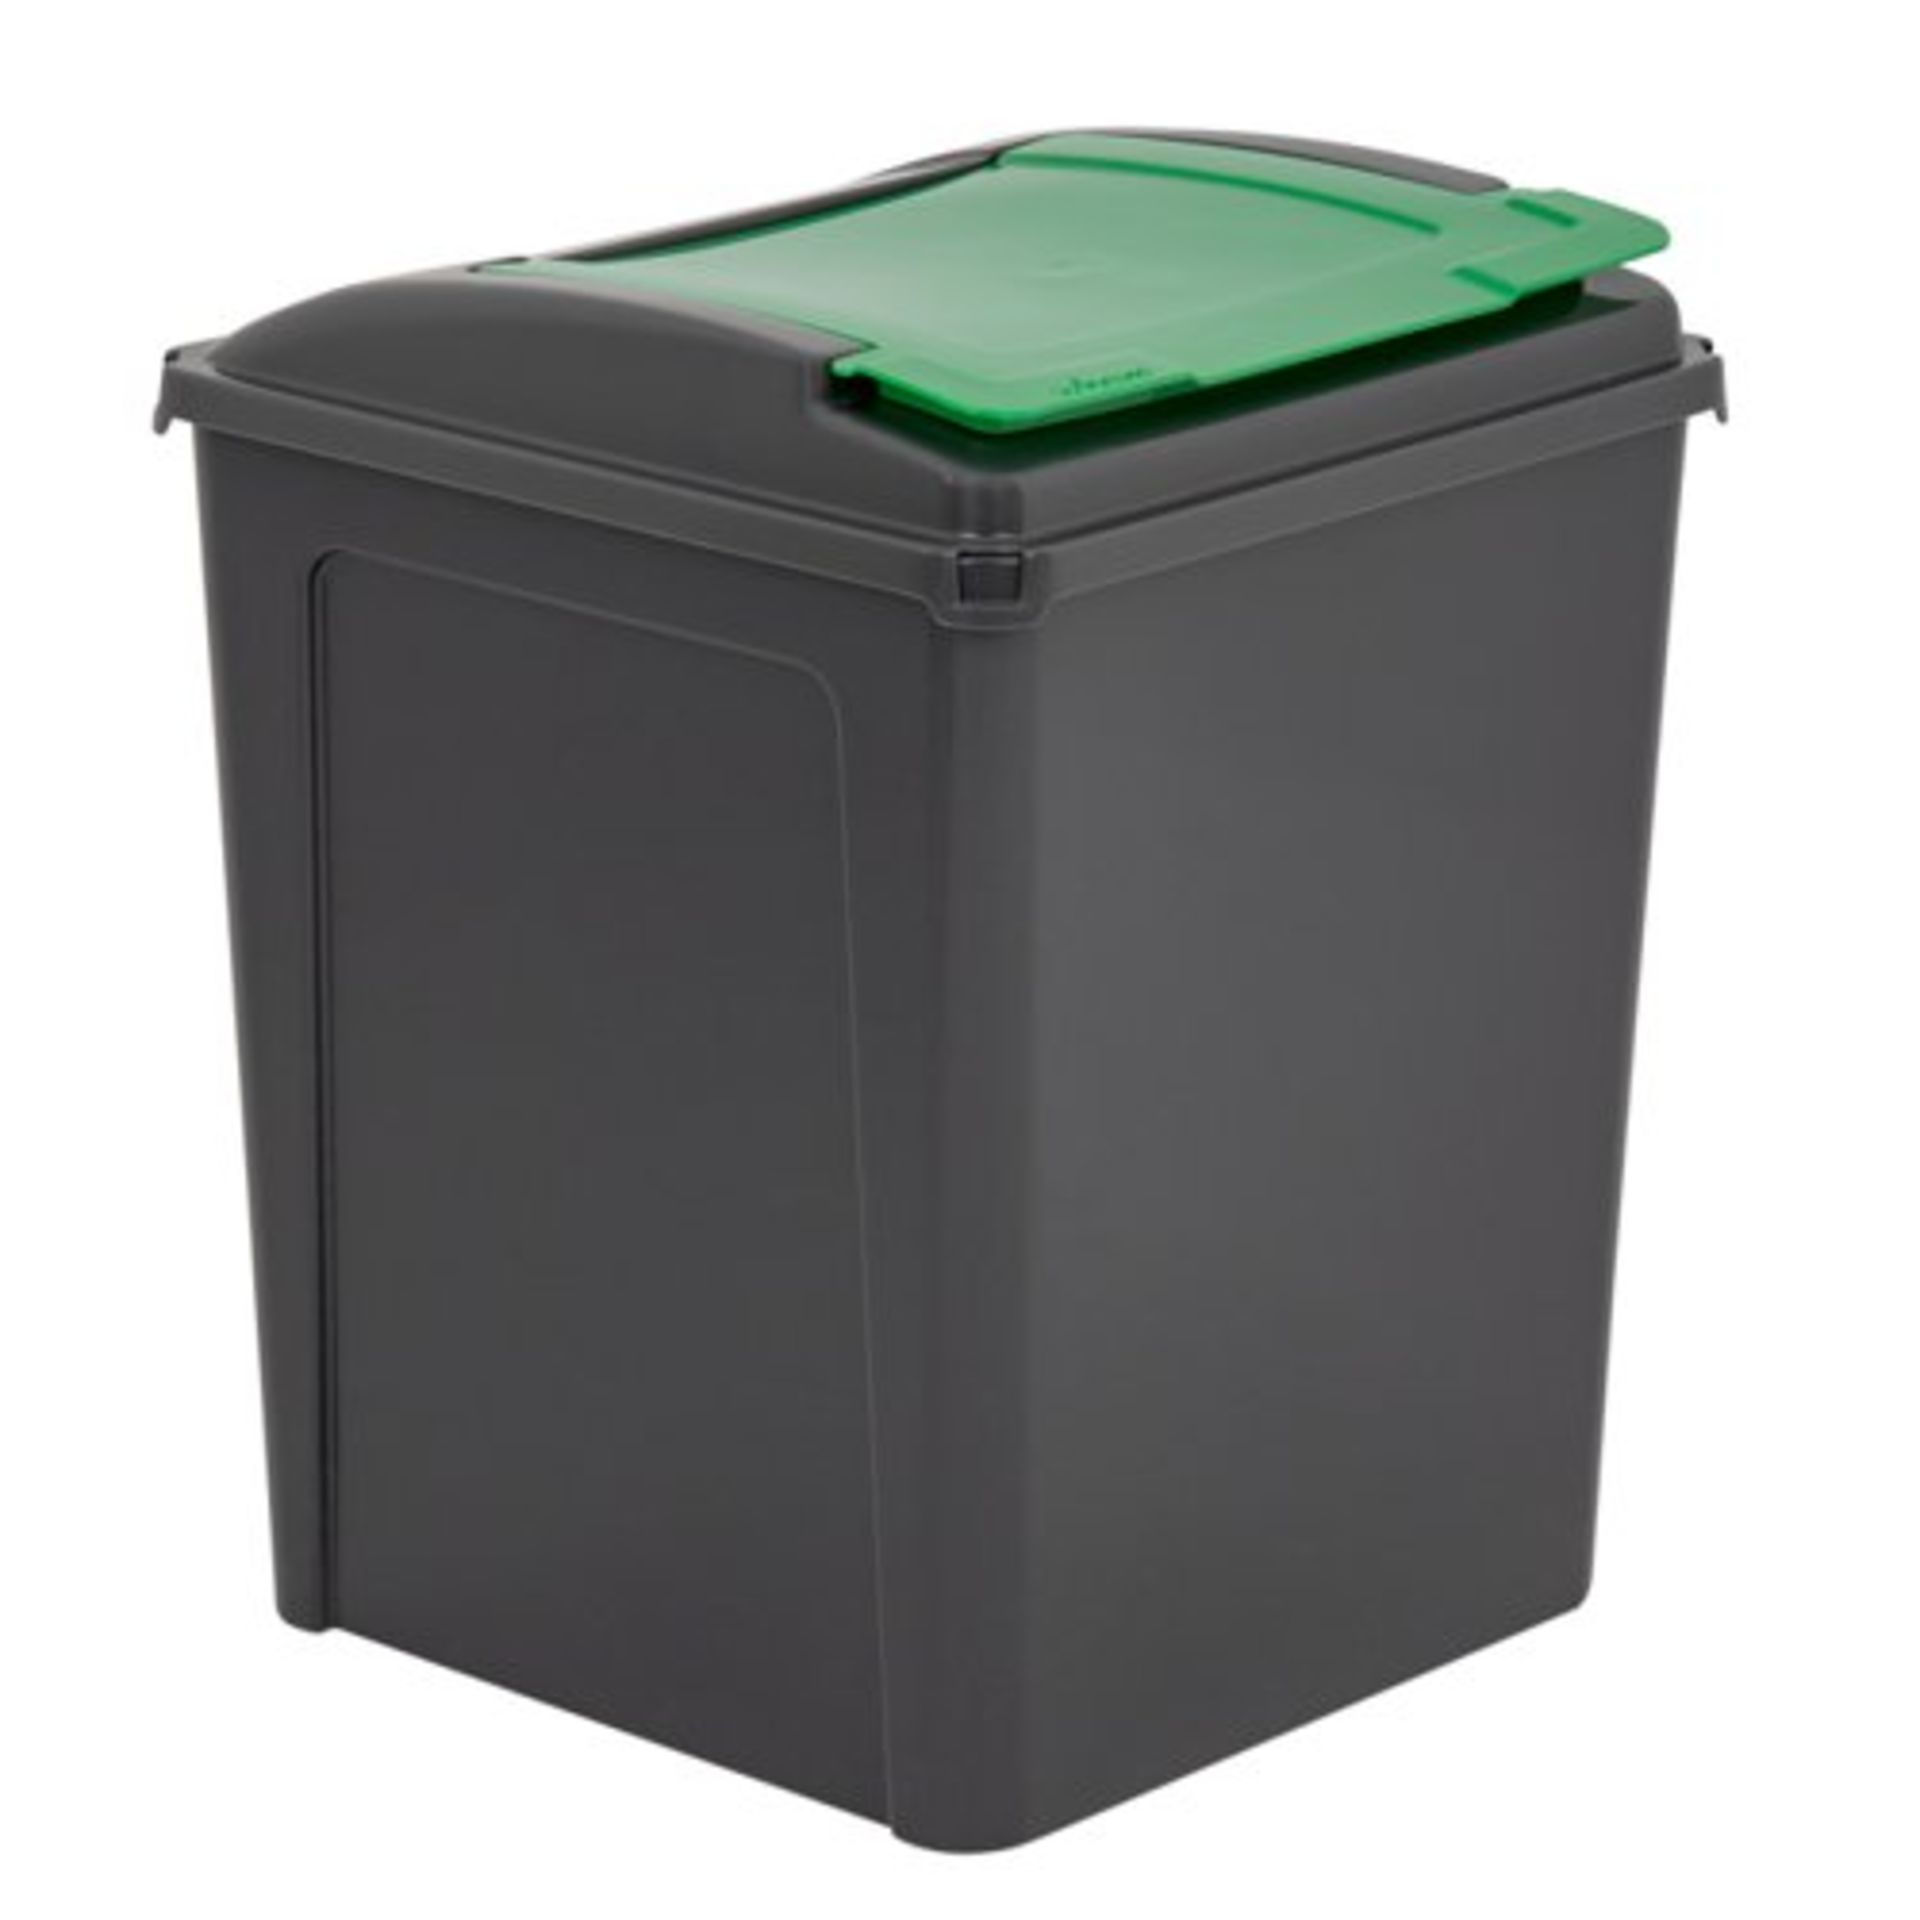 Wham 50ltr Recyle Bin (Delivery Band A)